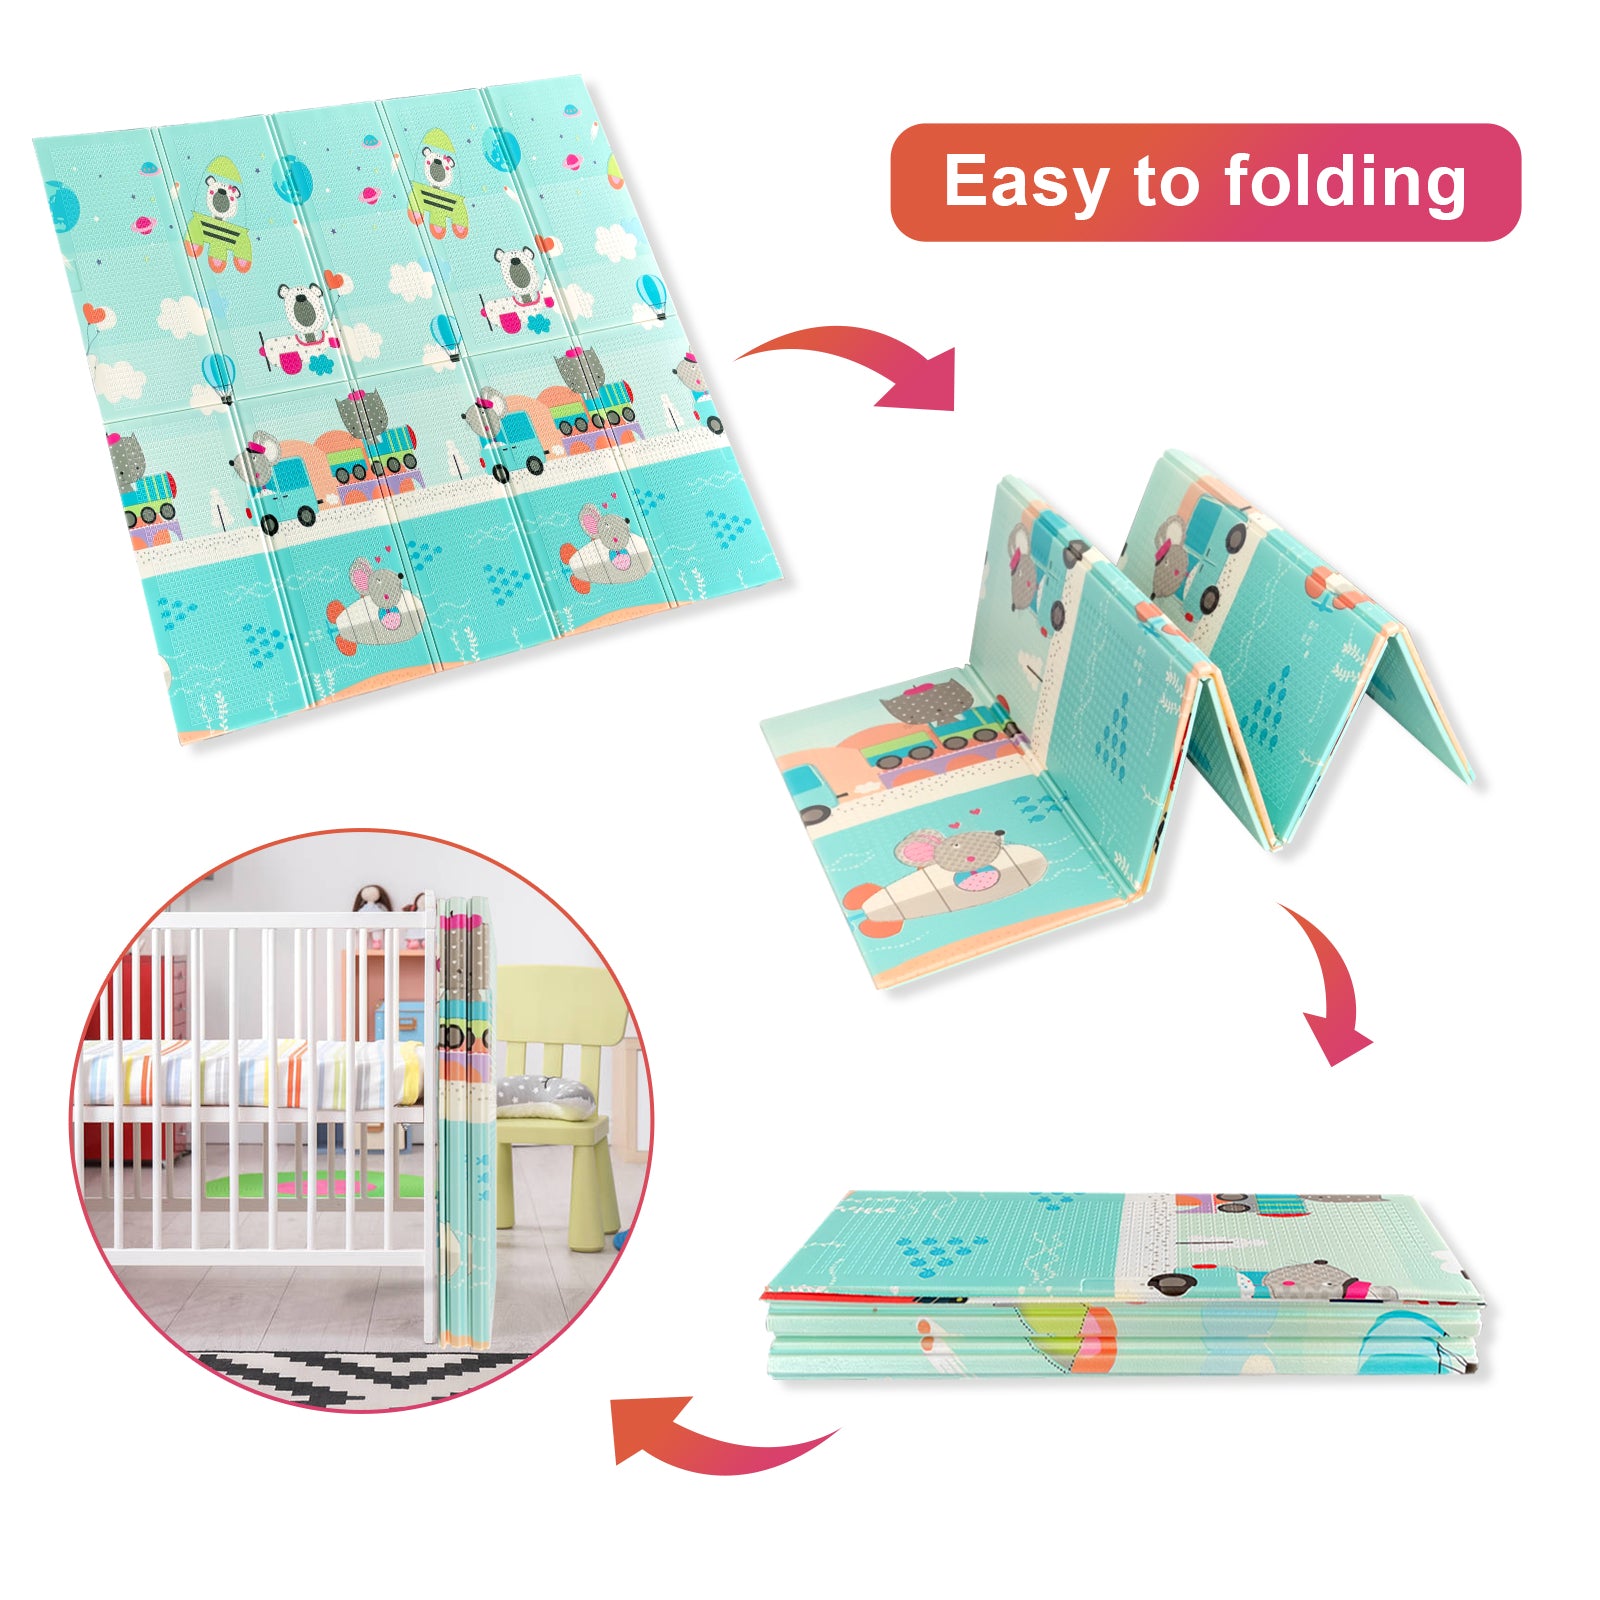 Baby Crawling Mat for Sale | Thick Baby Play Mat For Floor